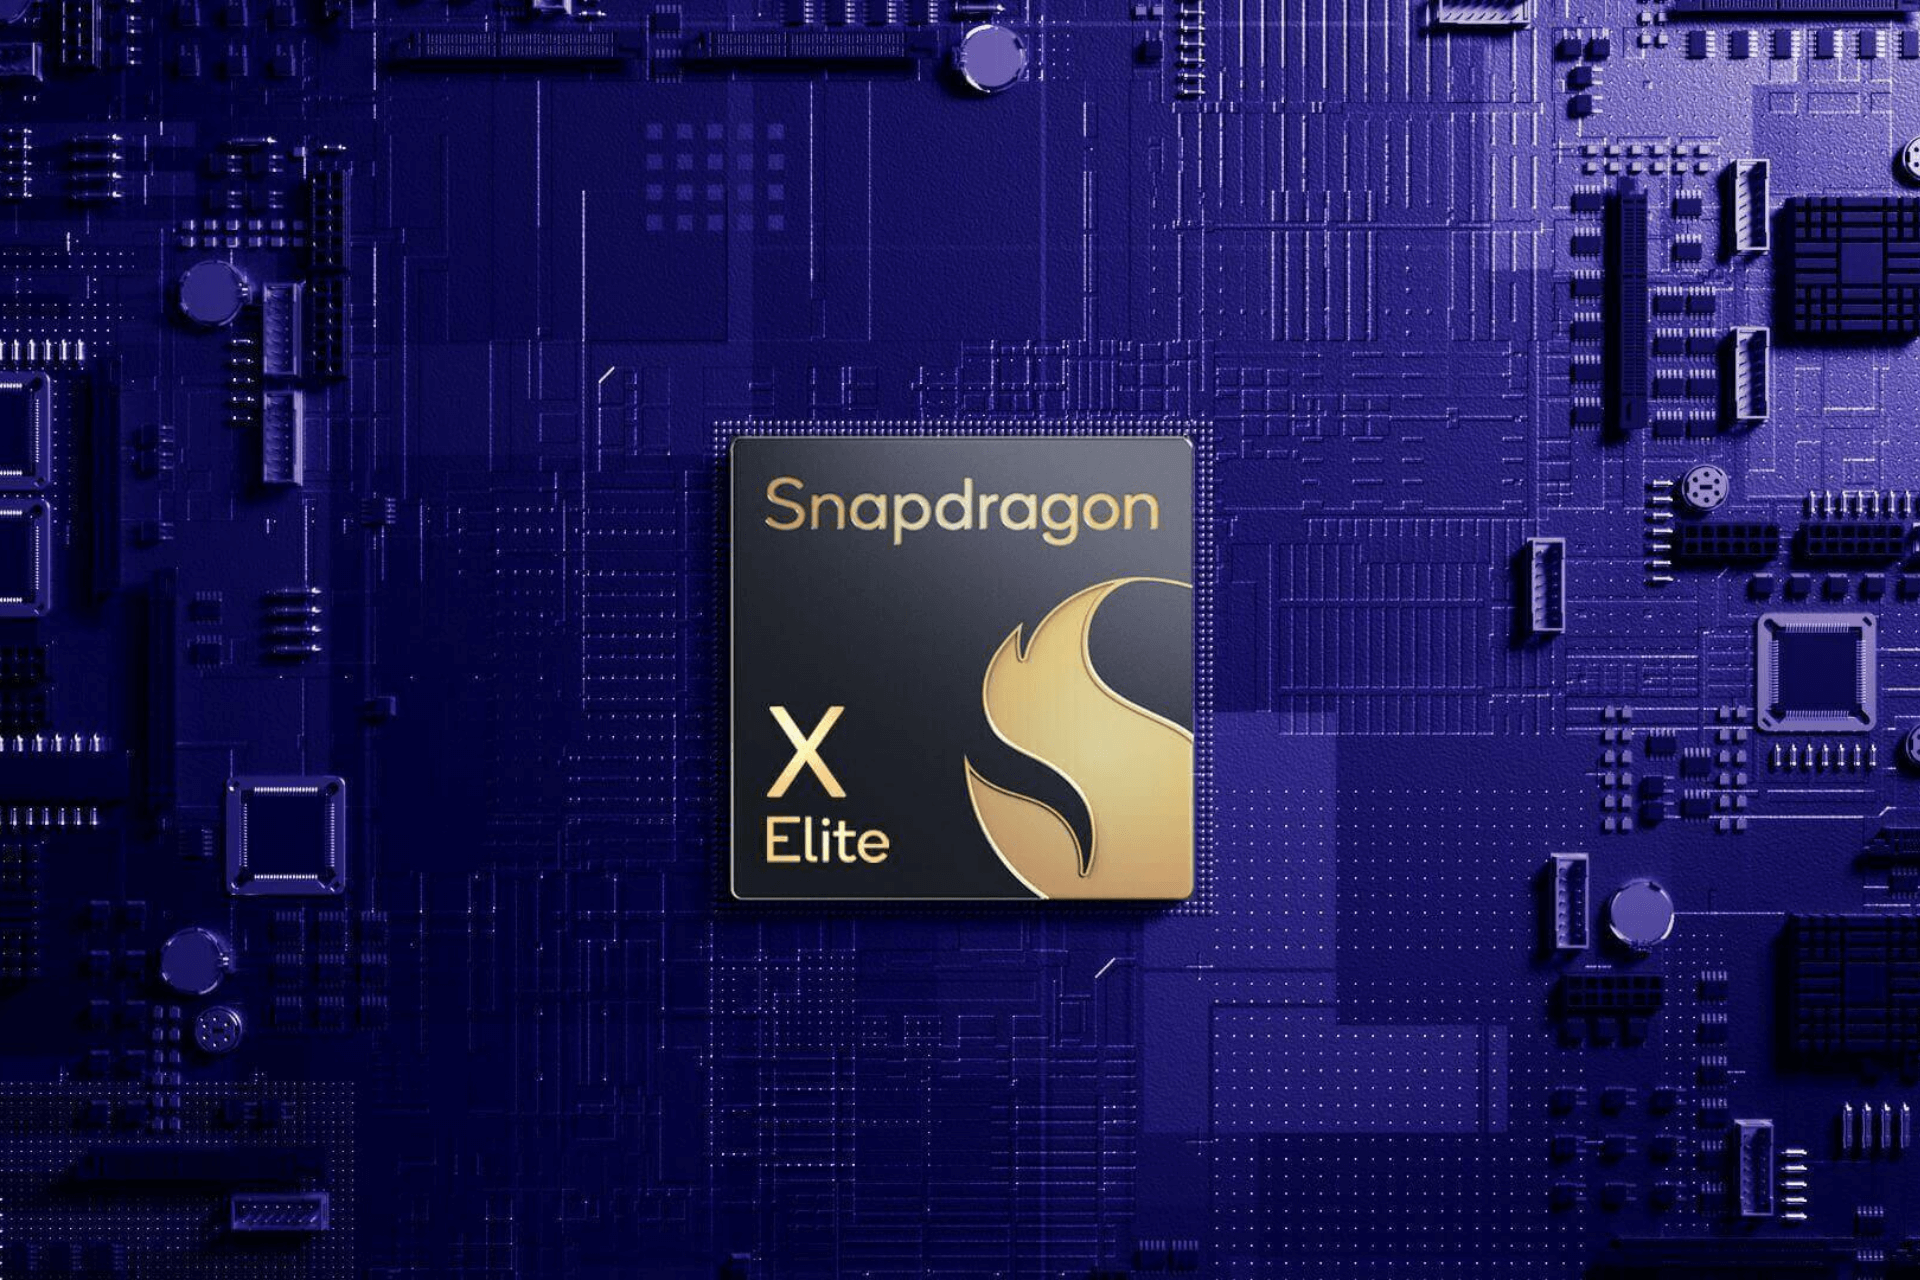 Qualcomm processor Snapdragon X Elite – XE1800 is catching up with Apple M3